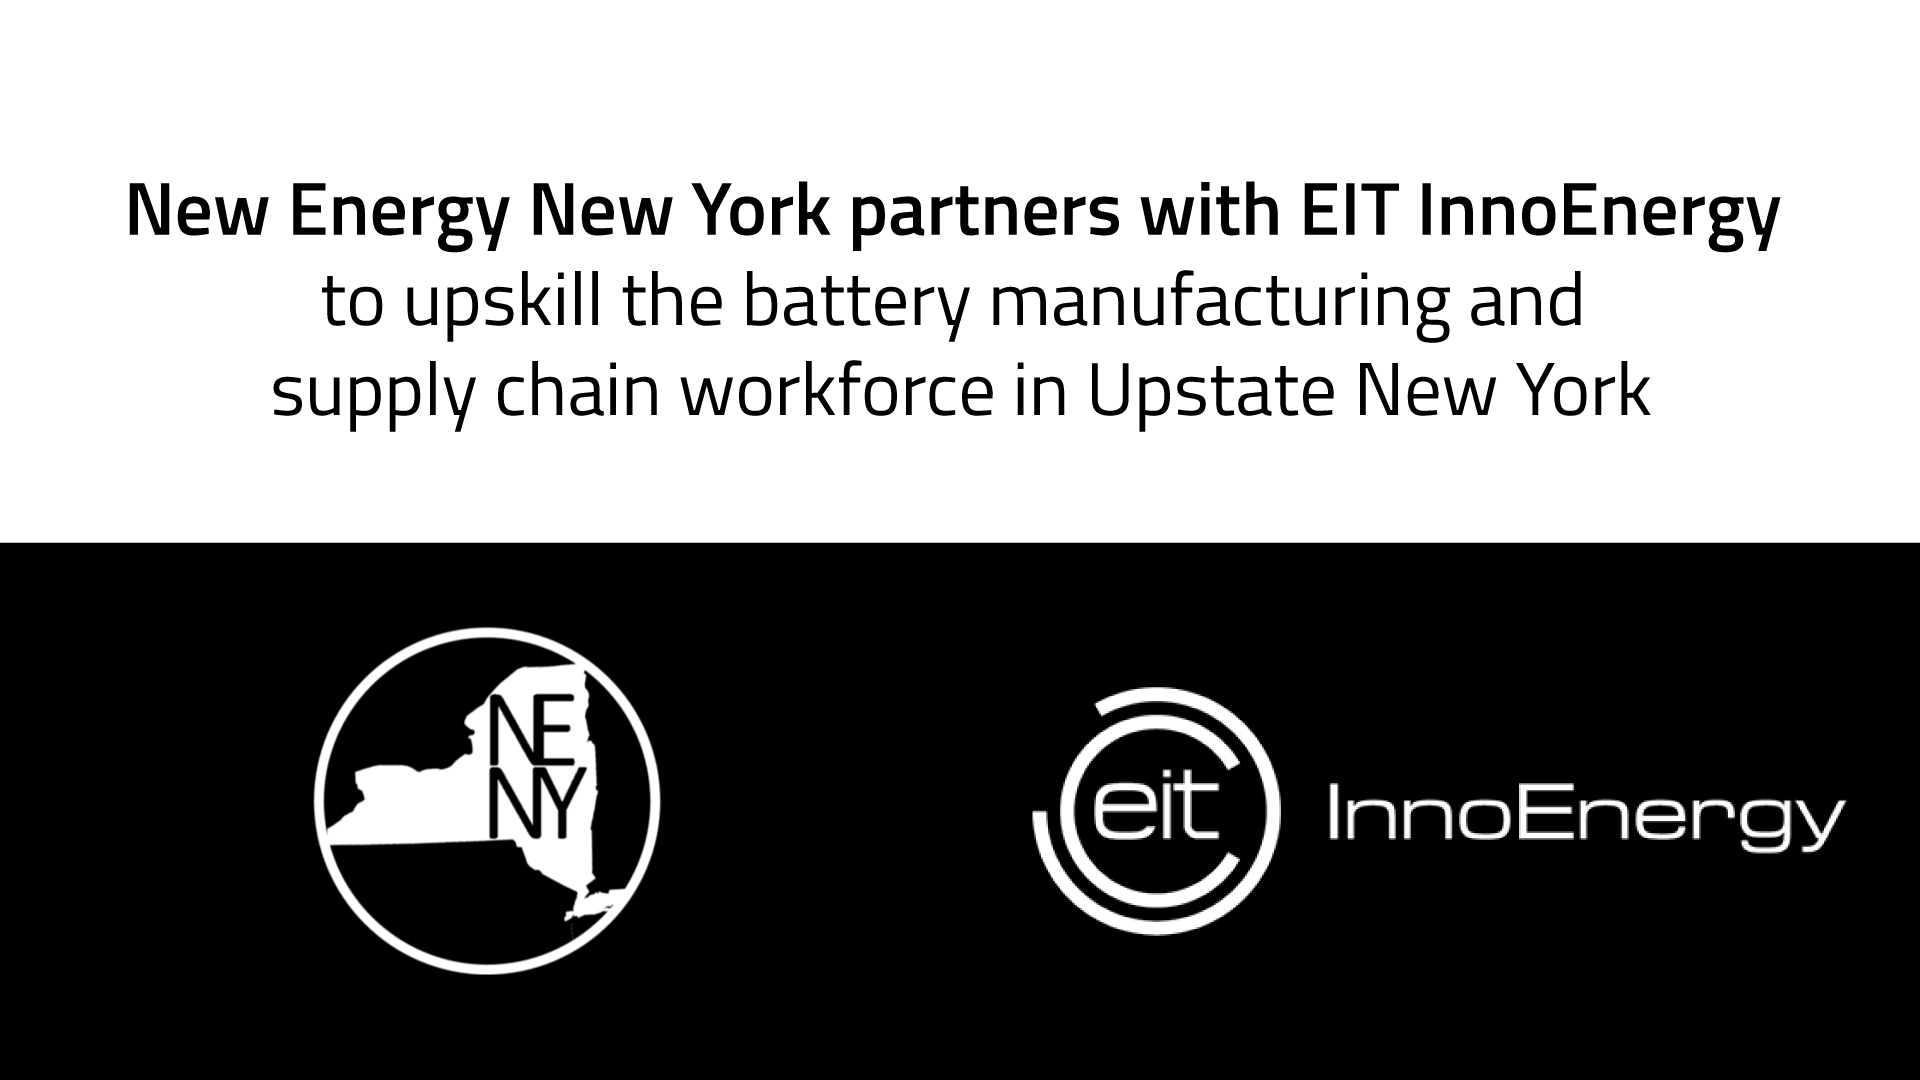 New Energy New York partners with EIT InnoEnergy to upskill the battery manufacturing and supply chain workforce in Upstate New York